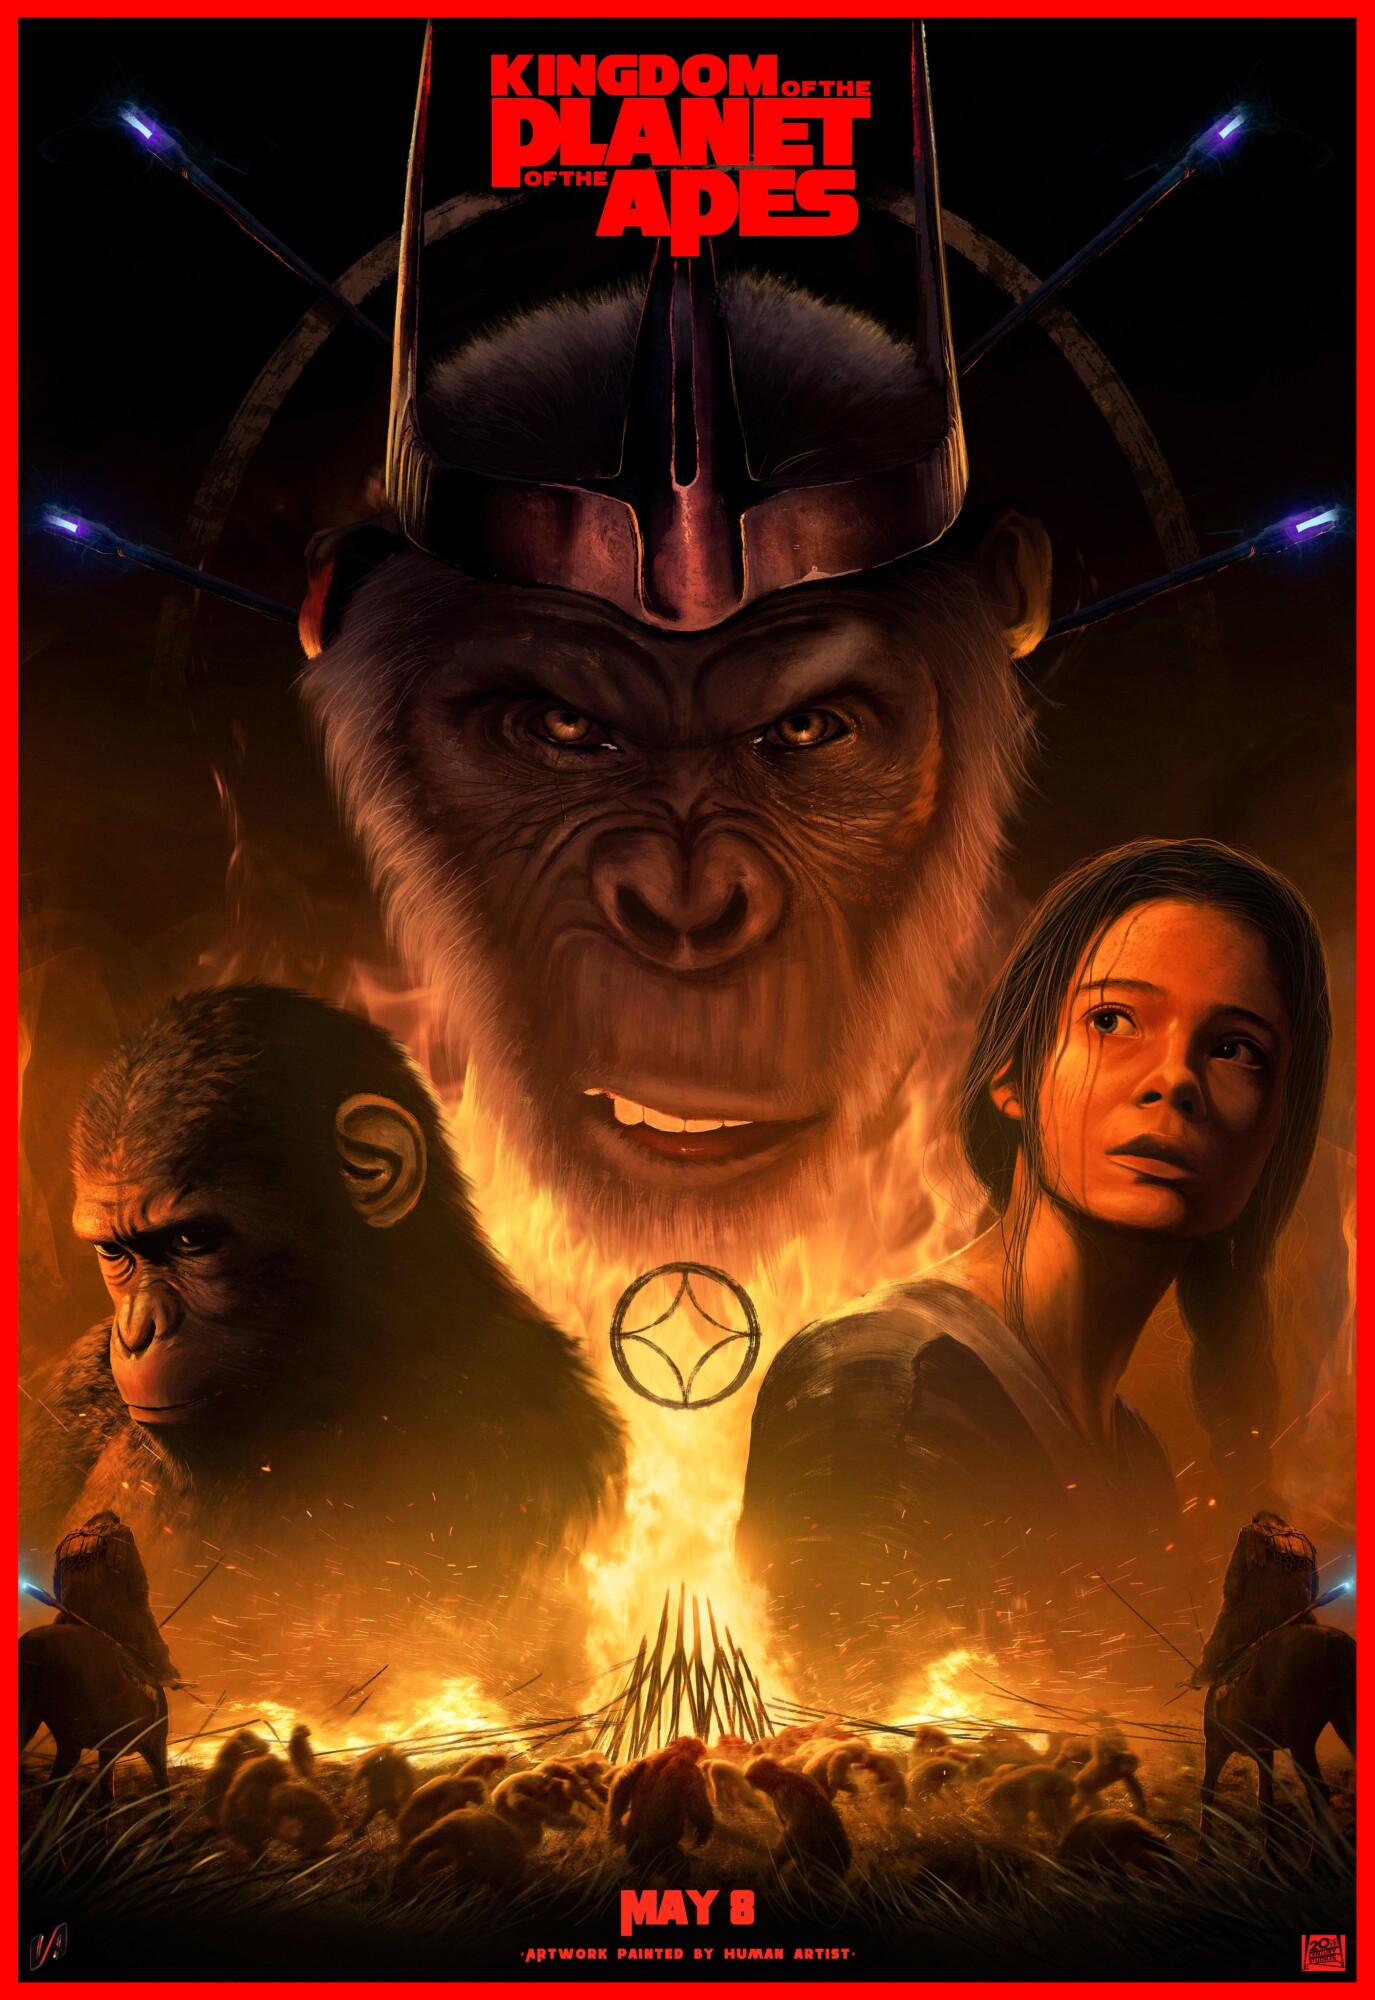 Kingdom of the planet of the apes